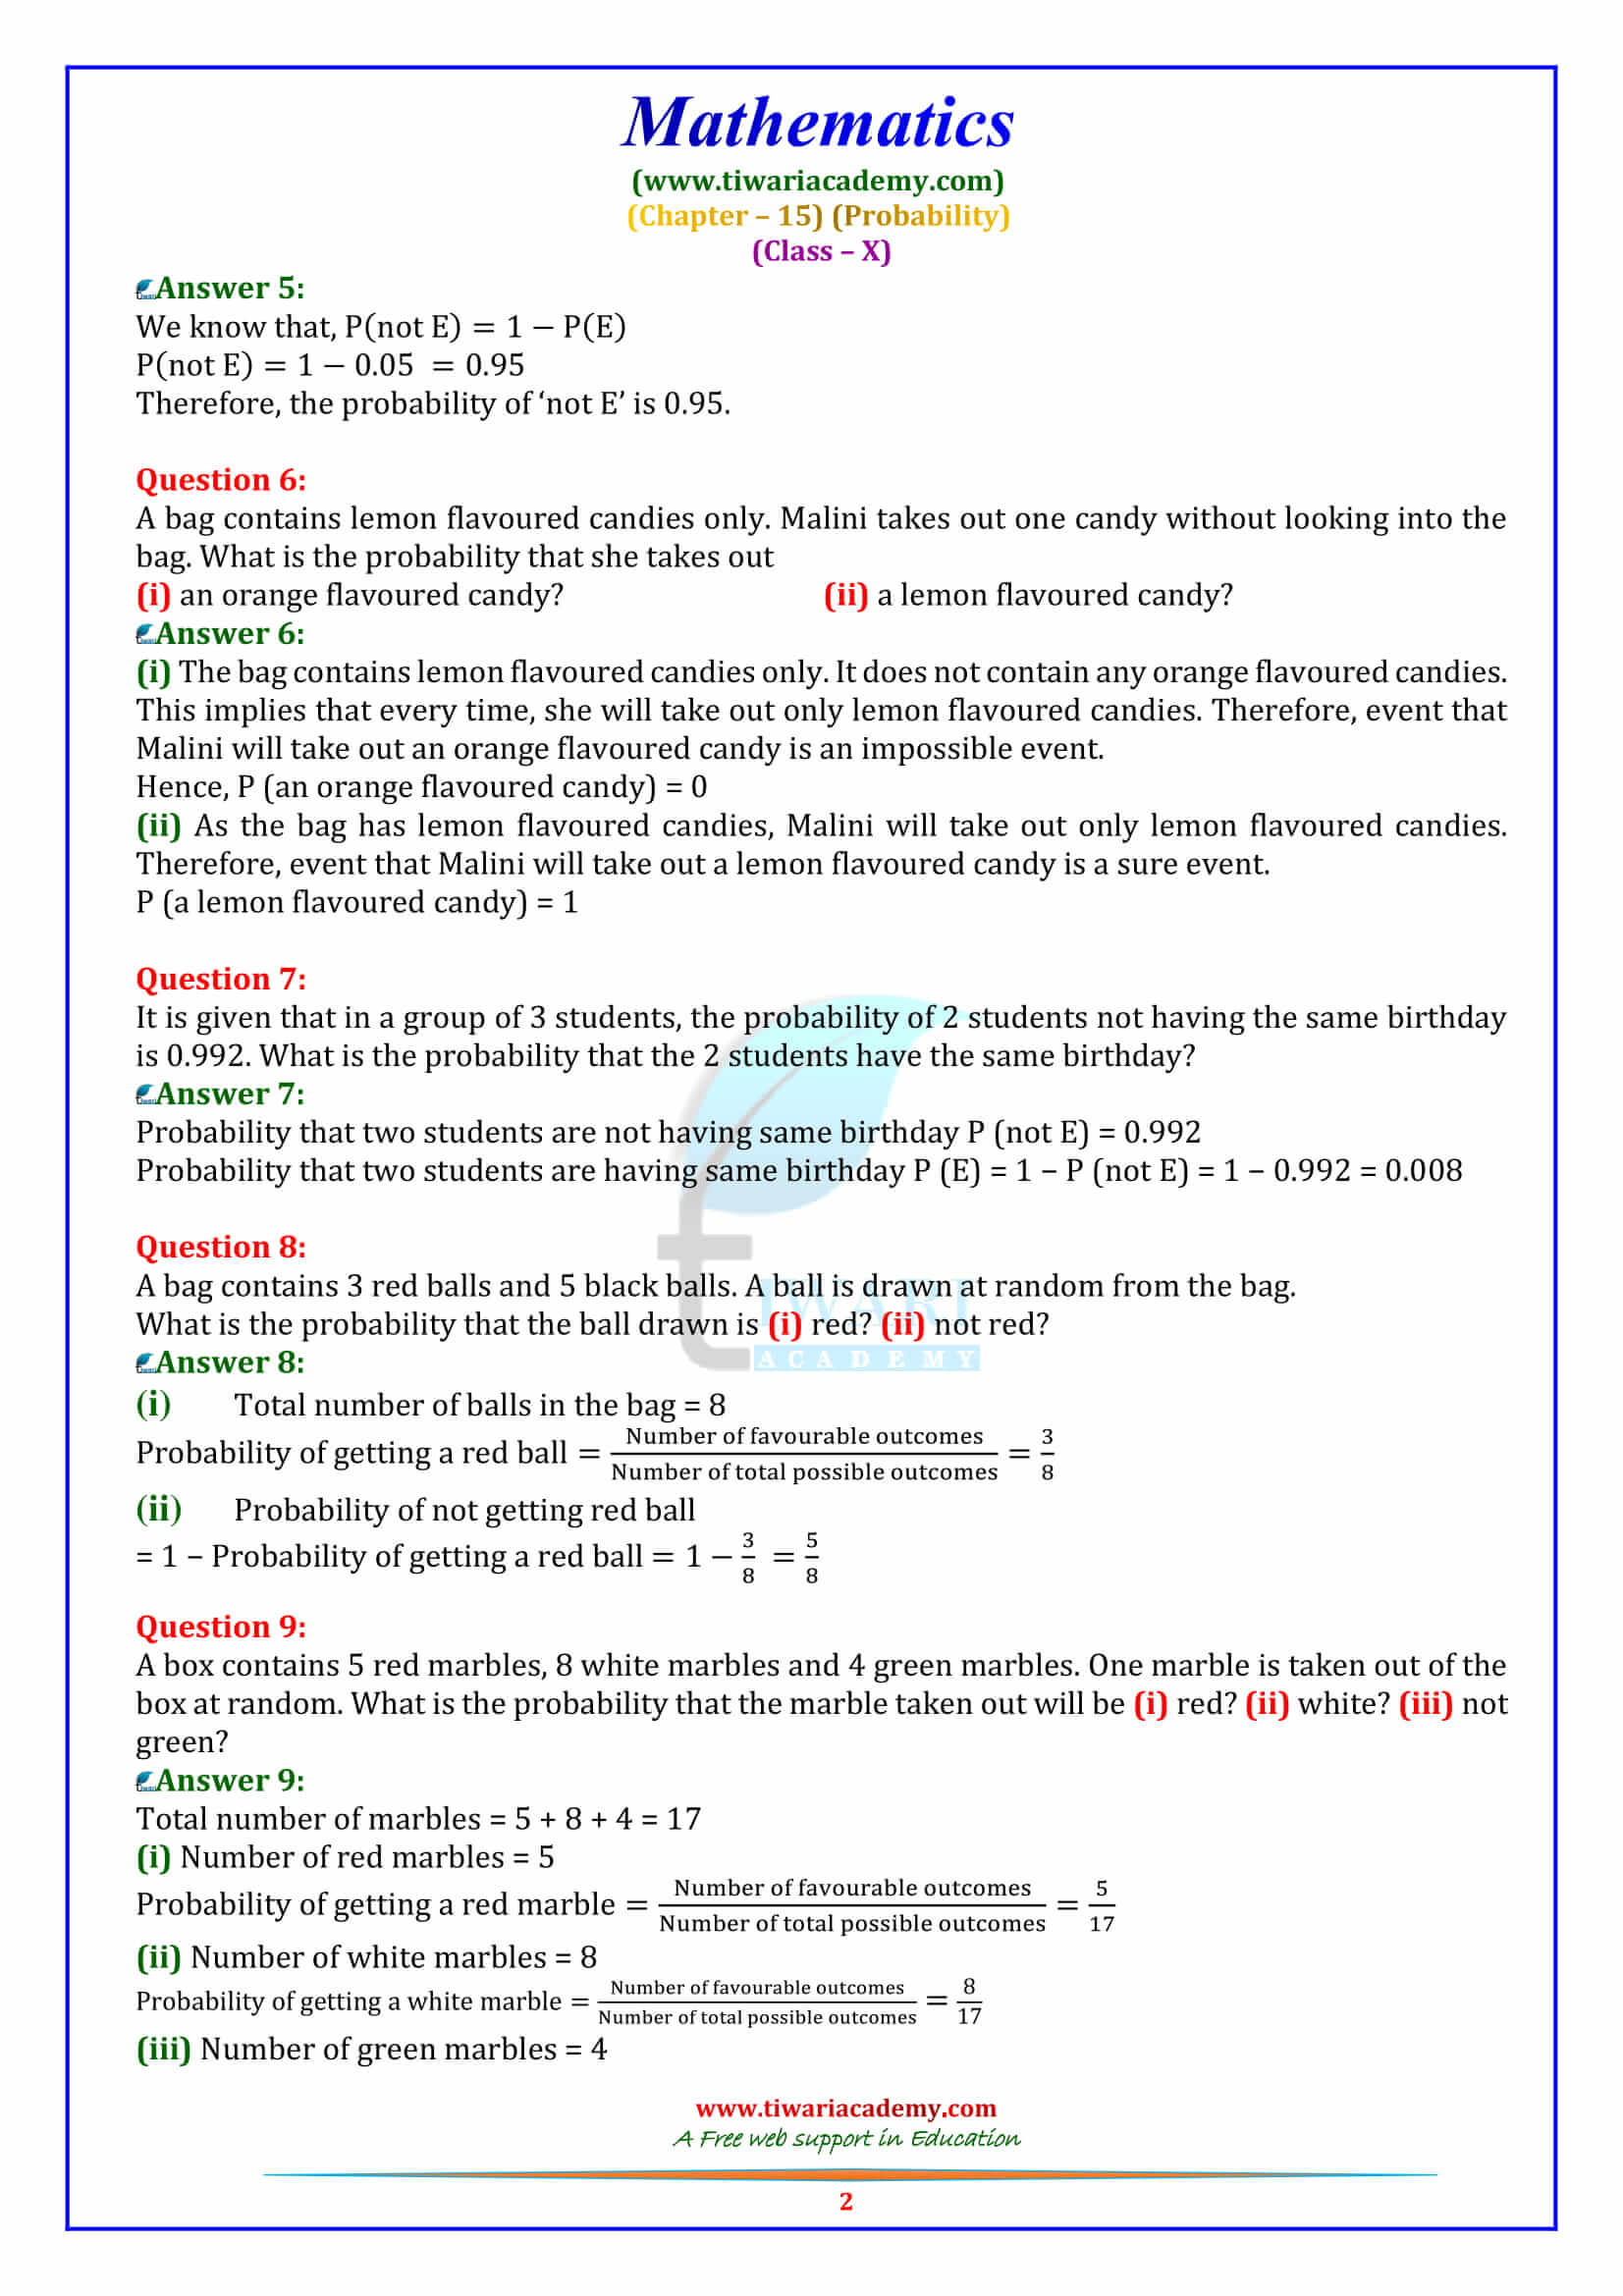 NCERT Solutions for Class 10 Maths Chapter 15 Exercise 15.1 Probability in pdf form